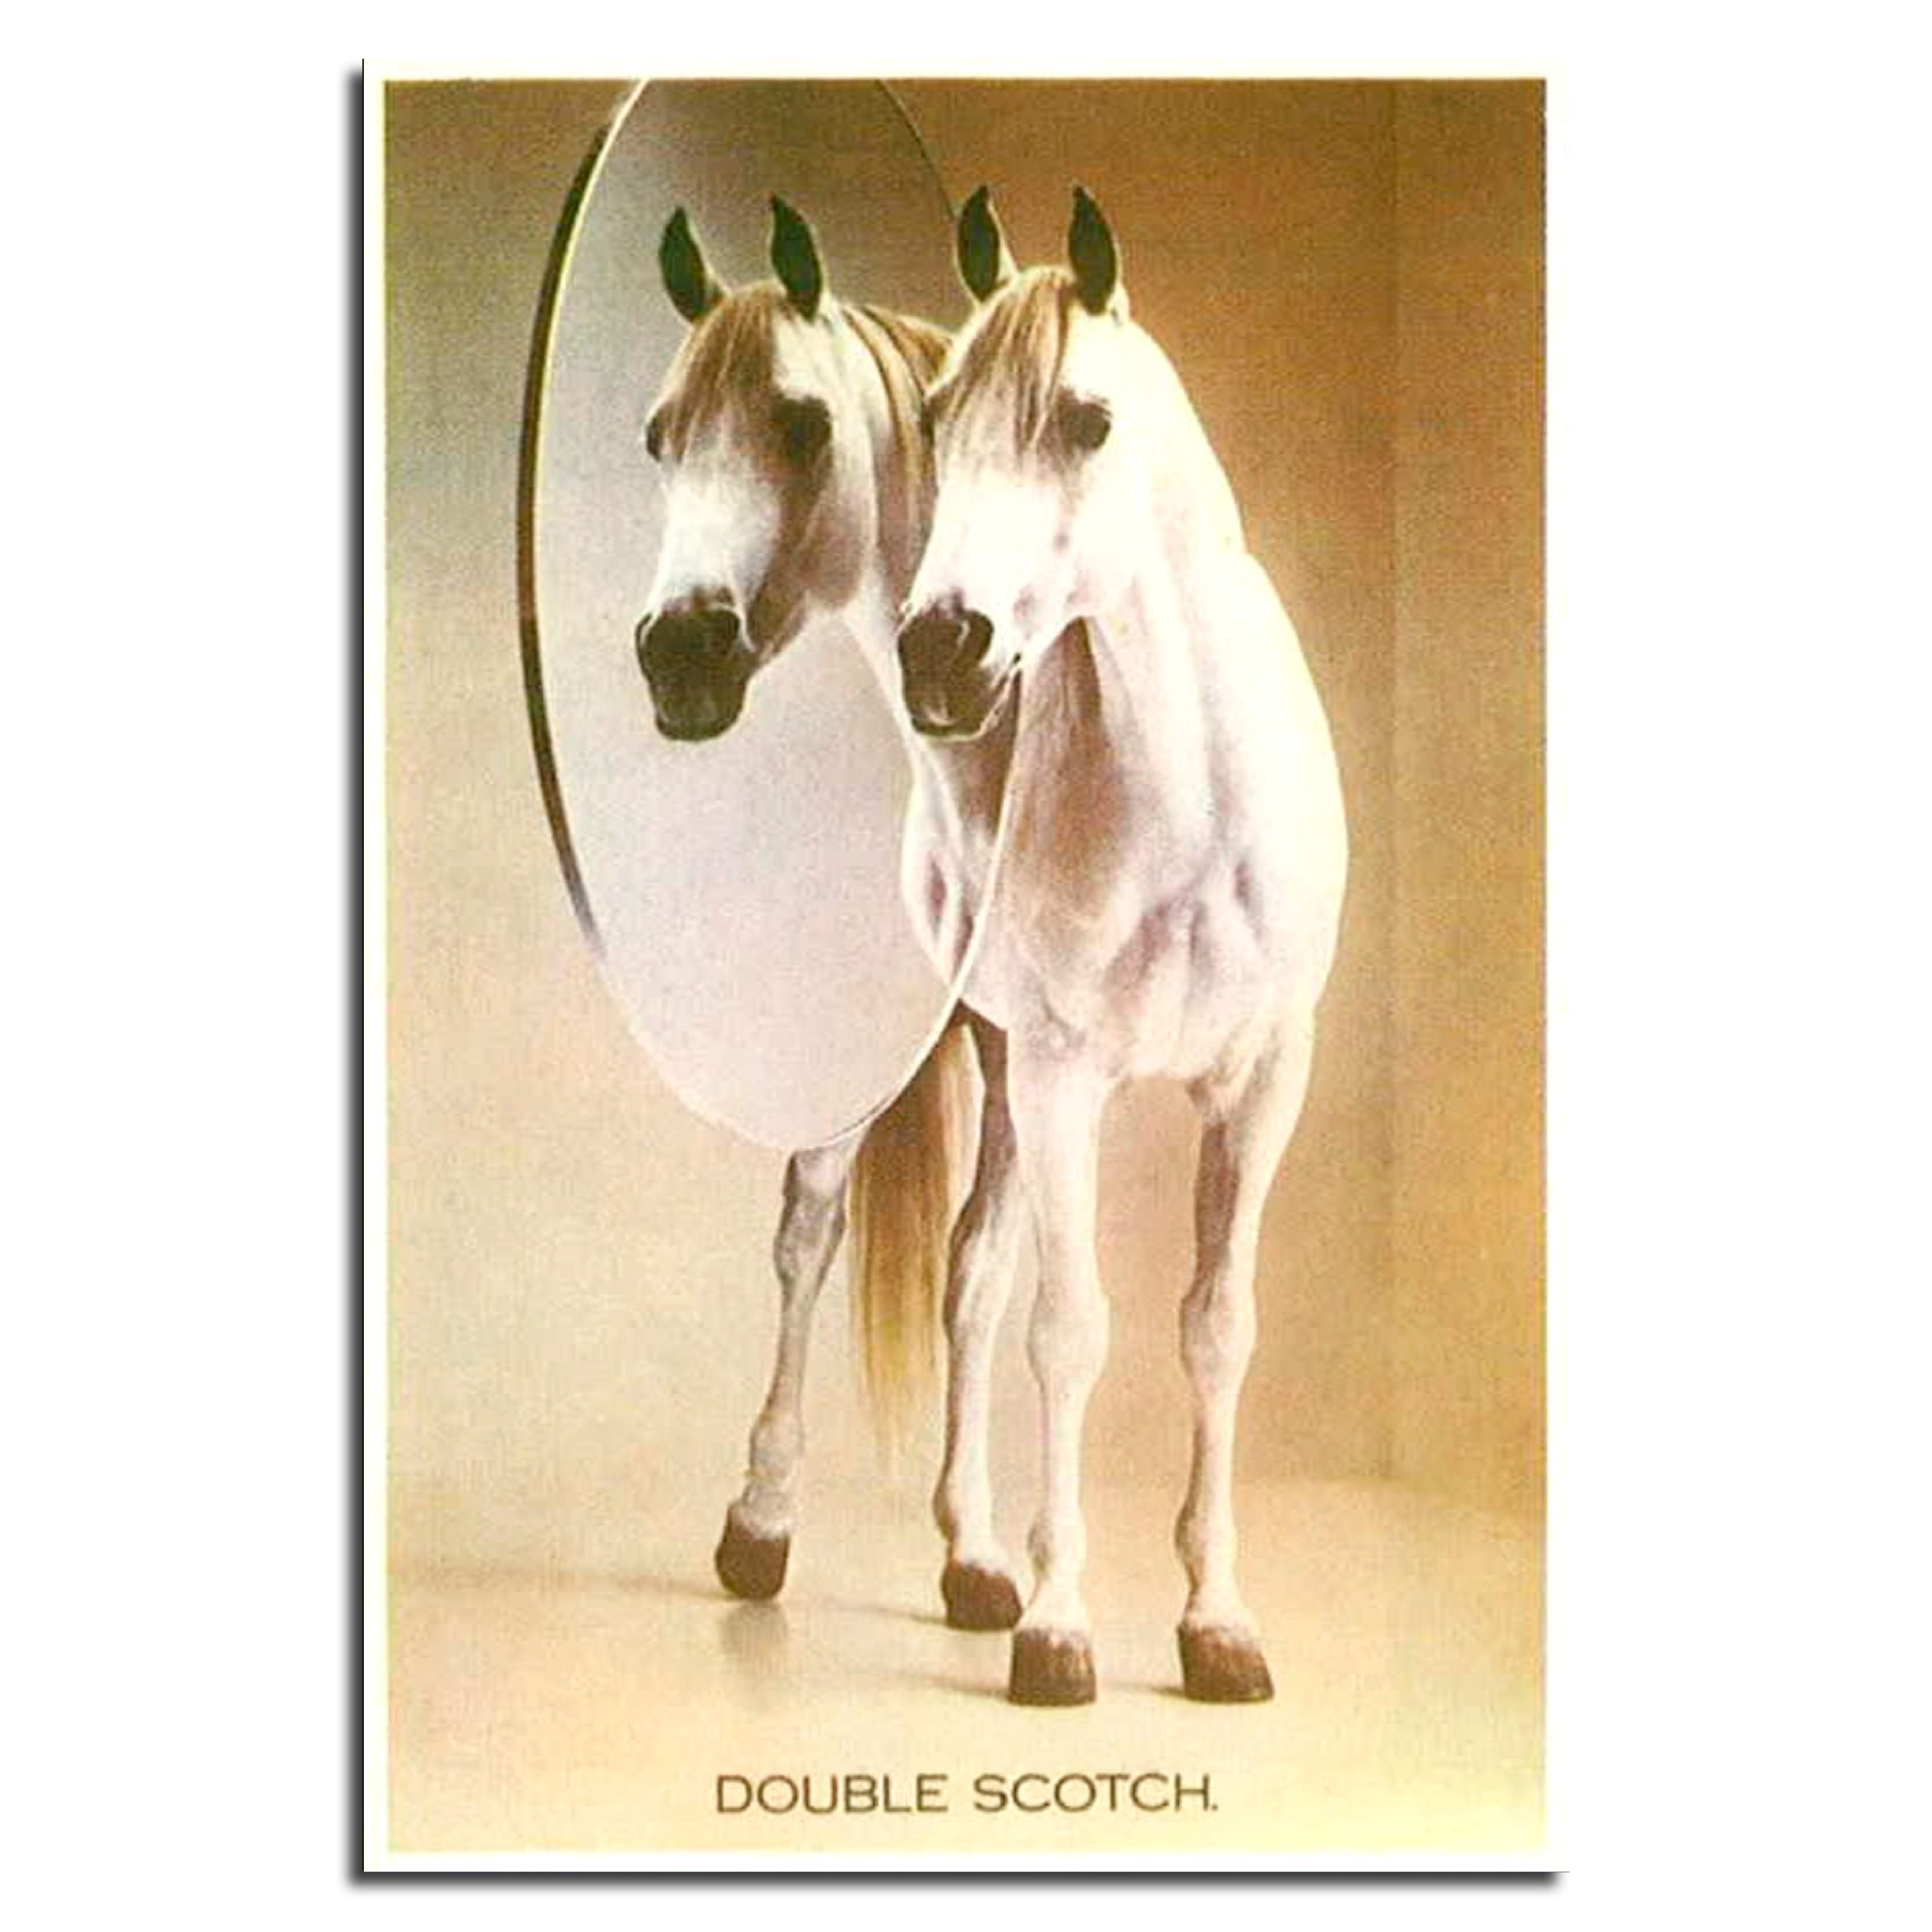 Photograph of a white horse standing in front of a mirror. Award-winning press ad for White Horse Whisky.